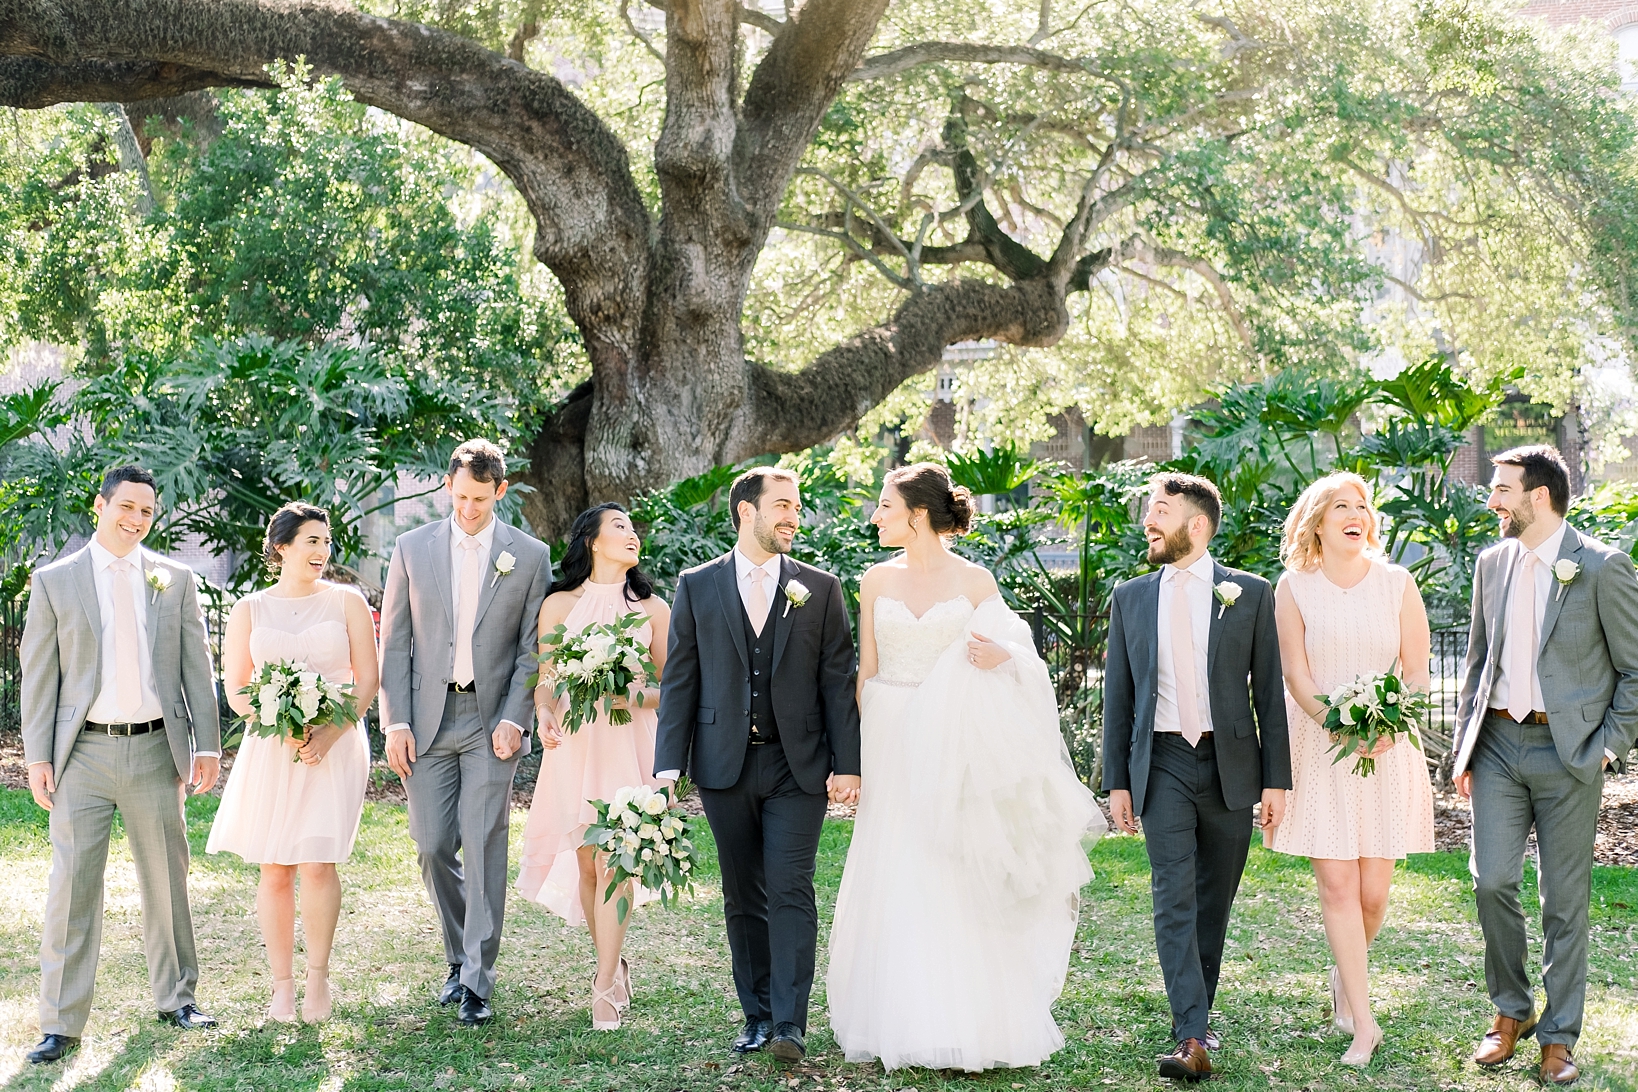 Entire bridal party walking across the lawn in a nice candid moment